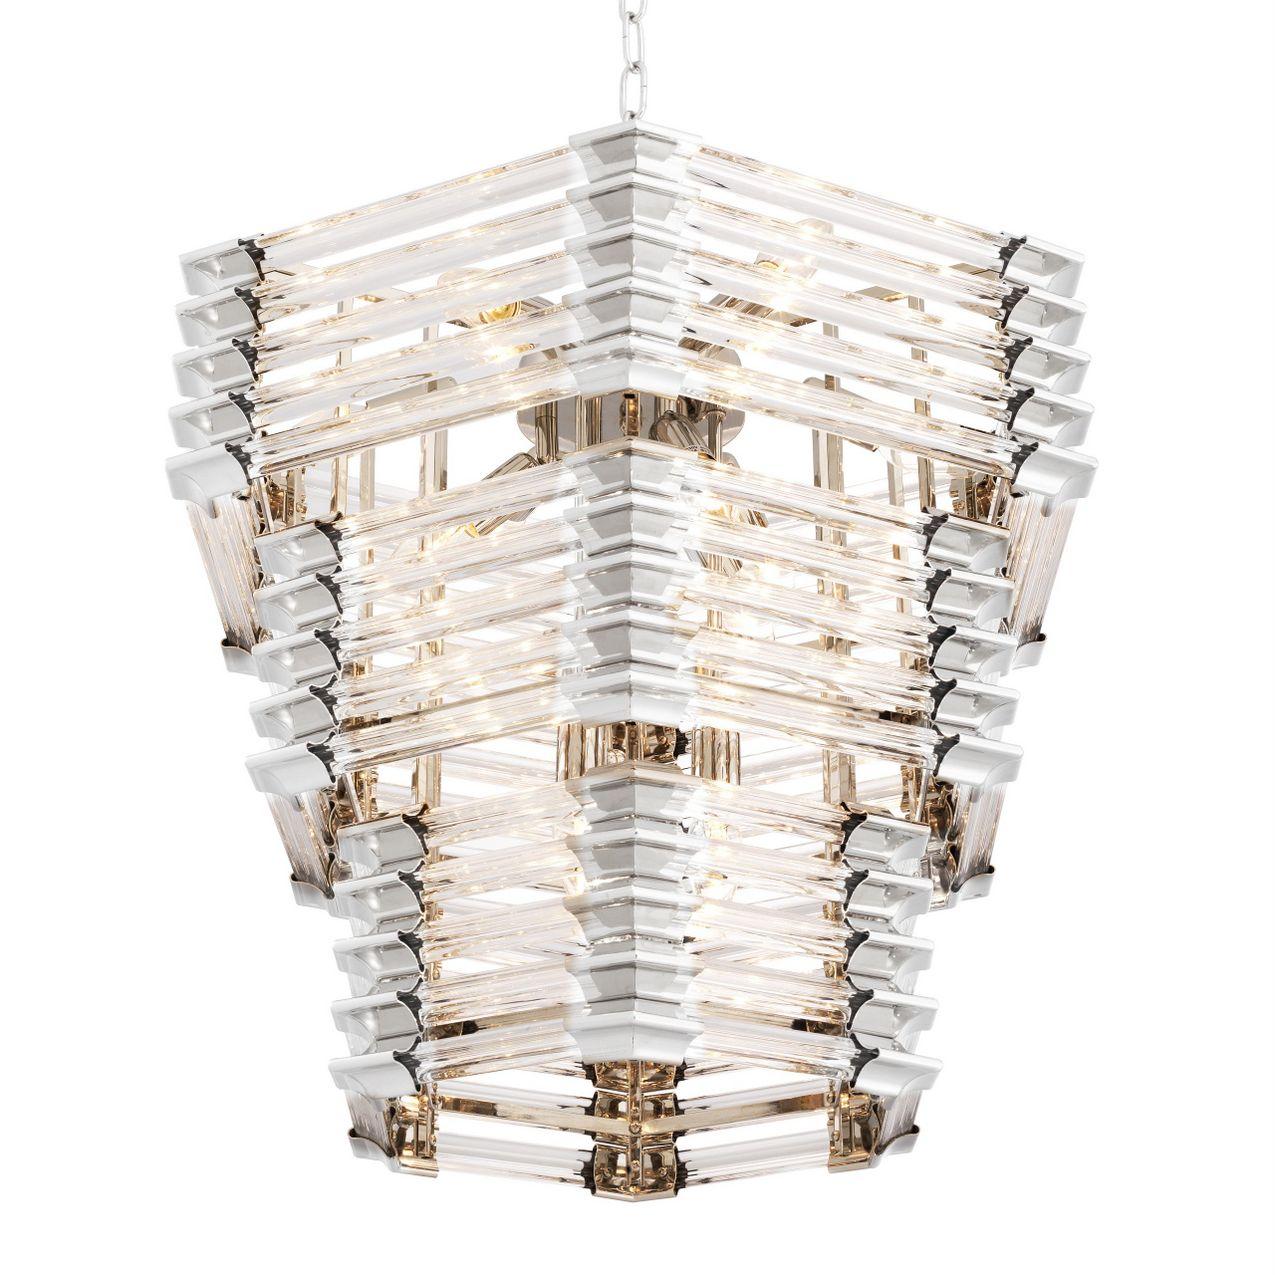 Glamorous and contemporary aesthetic ceiling light, make a statement with the wren chandelier. A modern take on classic style, this enticing hexagonal luminaire with nickel finish showcases a tapered three-tiered design with horizontal rows of clear